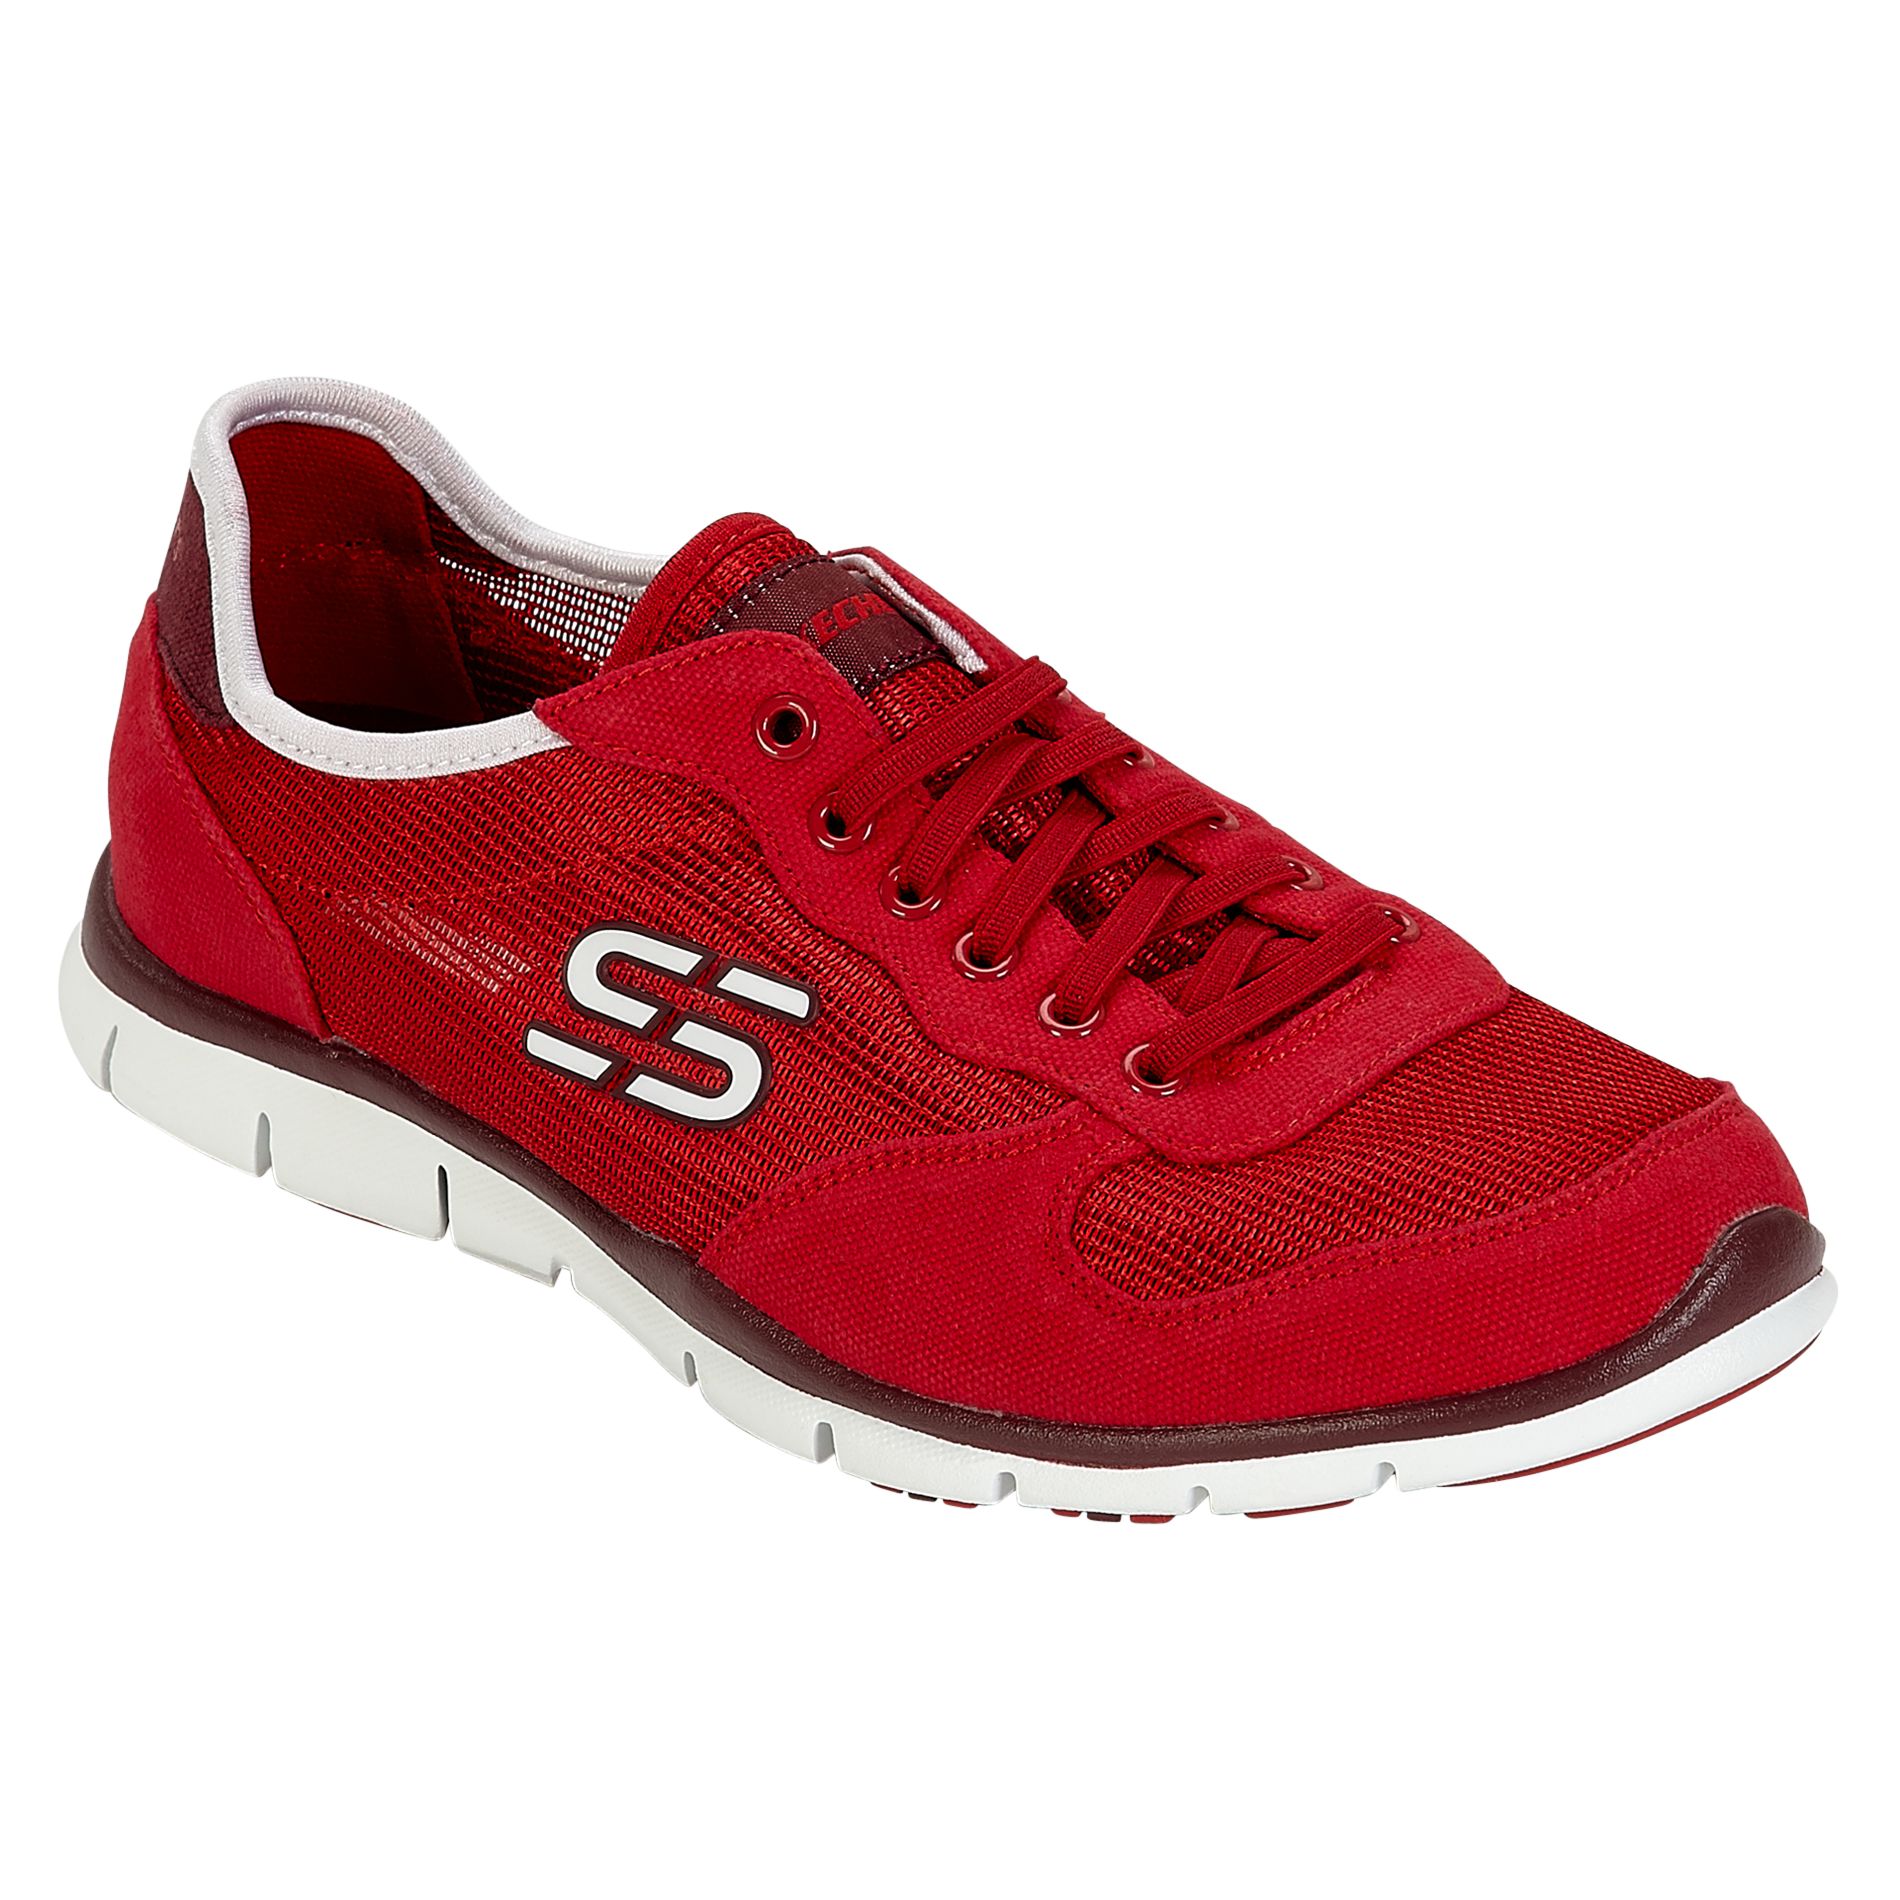 Skechers Women's Rock Party Casual Athletic Shoe - Red/White